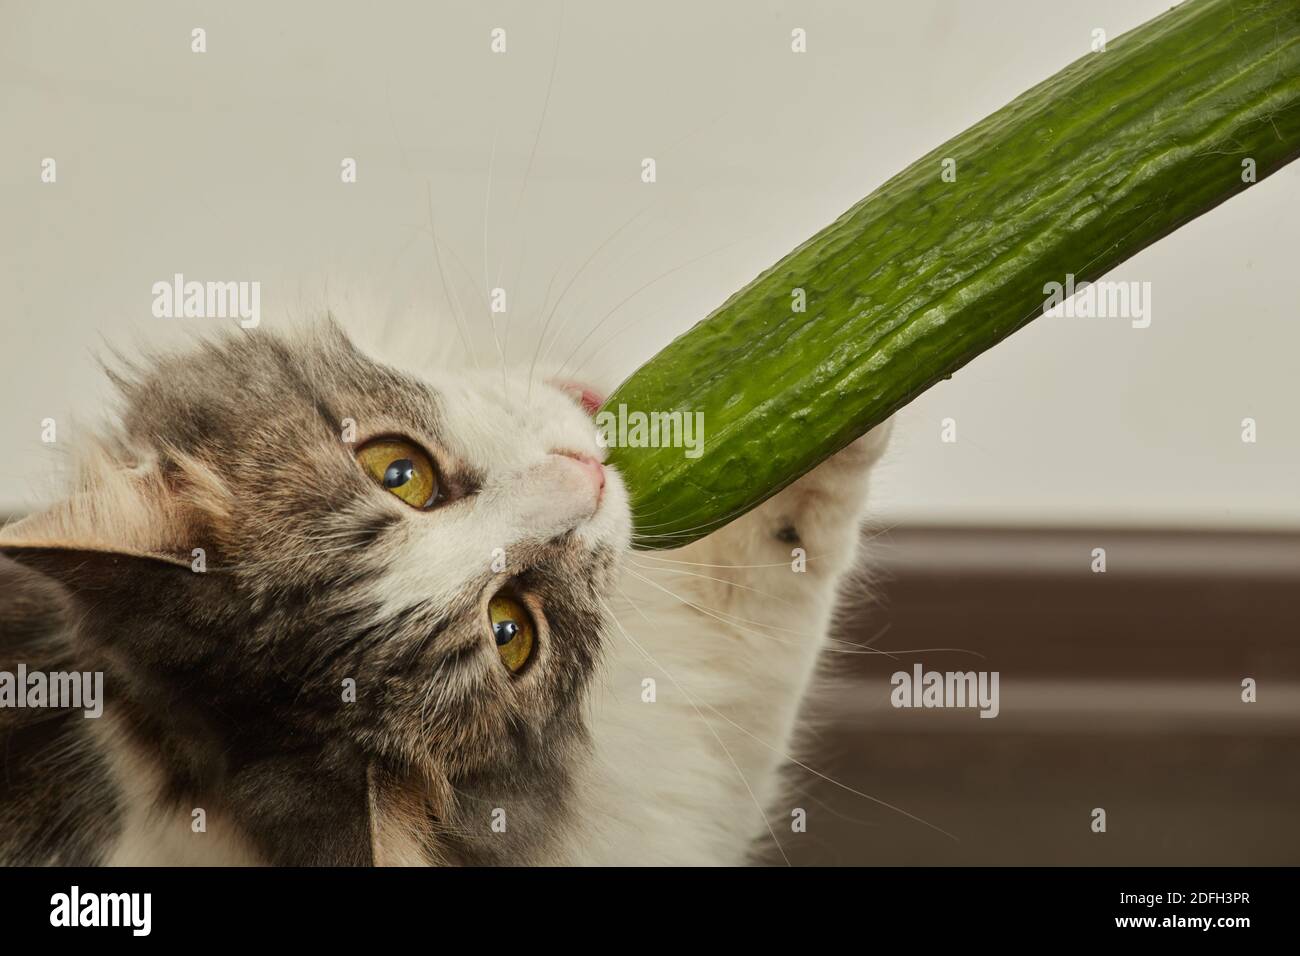 fun fluffy cat plays with cucumber eats it closeup view Stock Photo